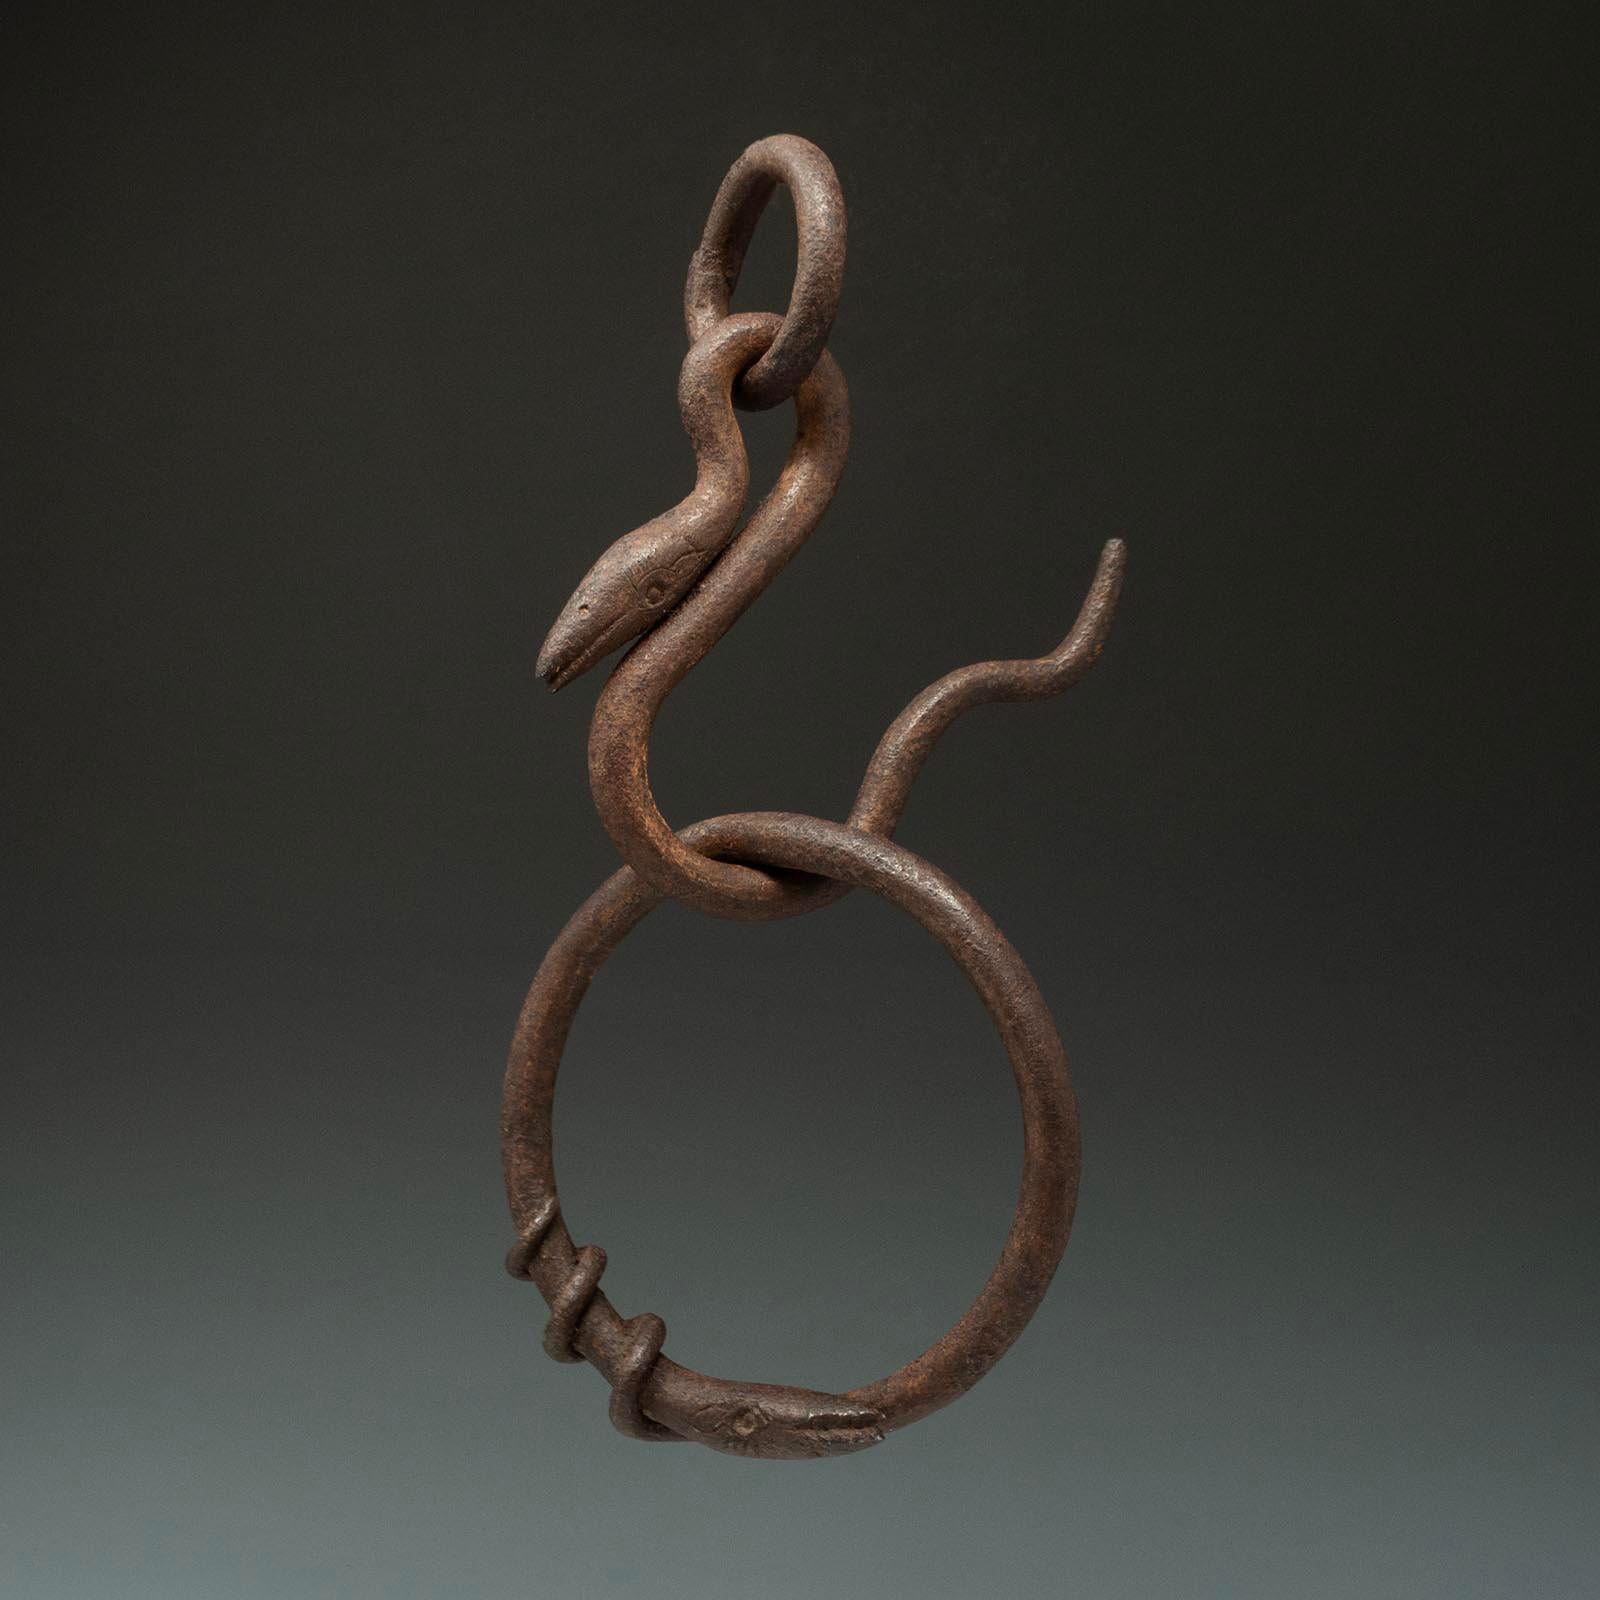 19th to early 20th century Iron hook and snare, Nepal

A rare, esoteric device used by Buddhist Tantric practitioners in Tibet and Nepal as a method of controlling events. These powerful tools can be used for catching good luck and wisdom, or